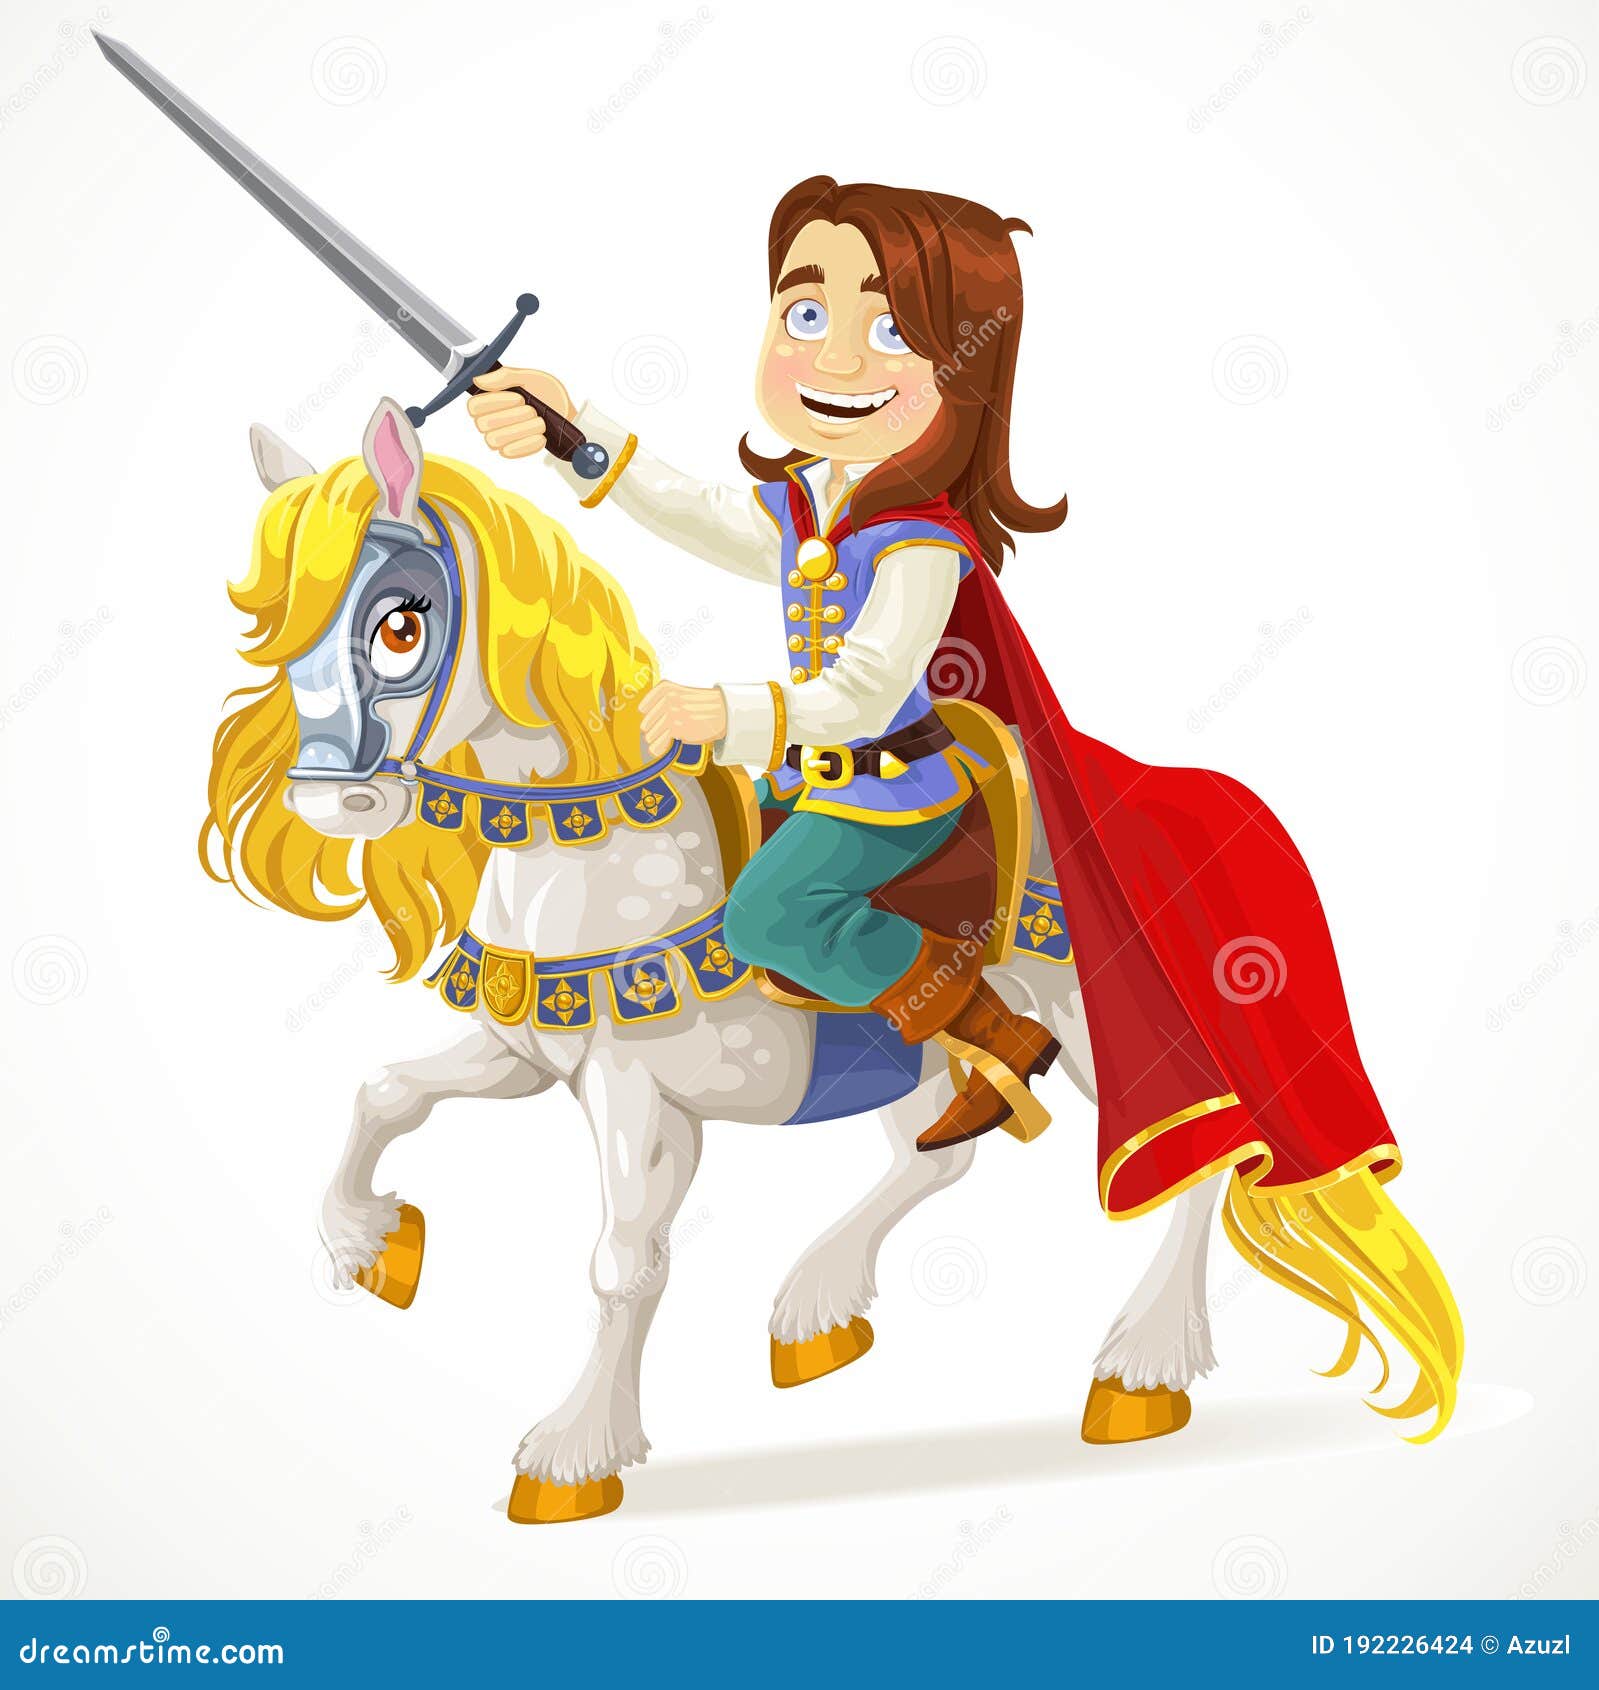 Brave Prince Charming on a White Horse Stock Vector - Illustration of ...